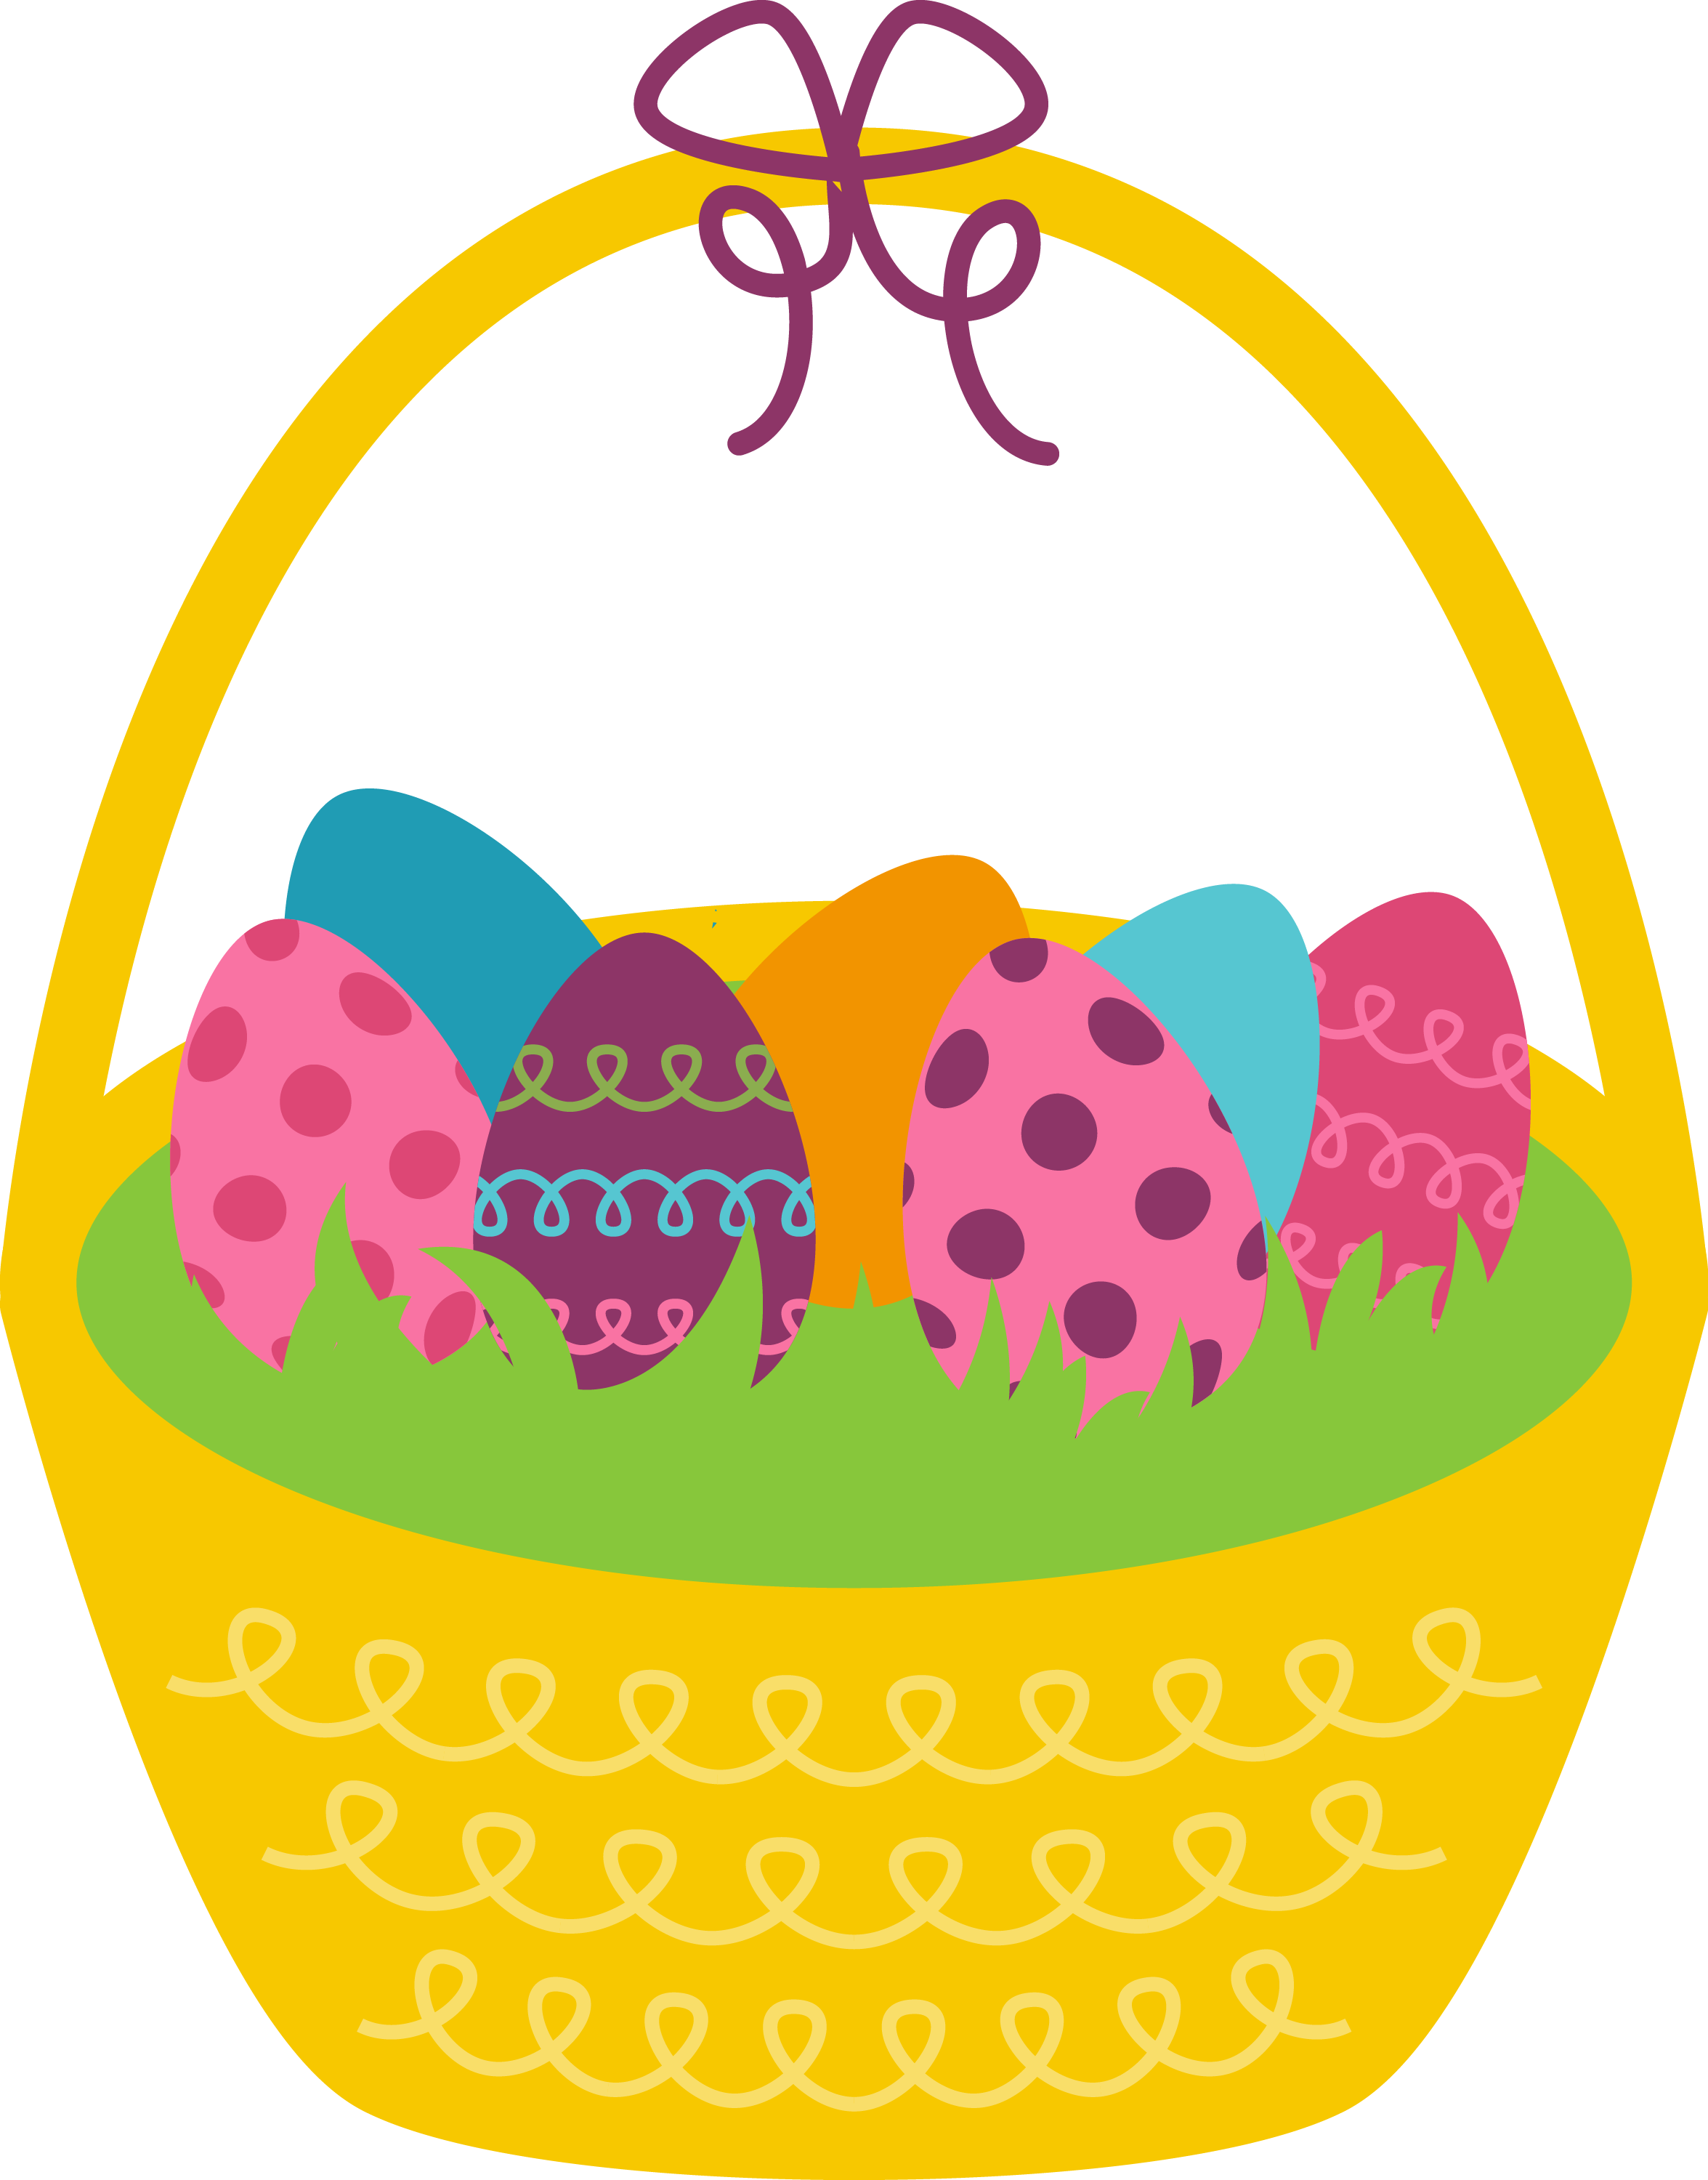 Kids Can Come Paint Easter Eggs With The Easter Bunny - Kids Can Come Paint Easter Eggs With The Easter Bunny (2351x3000)